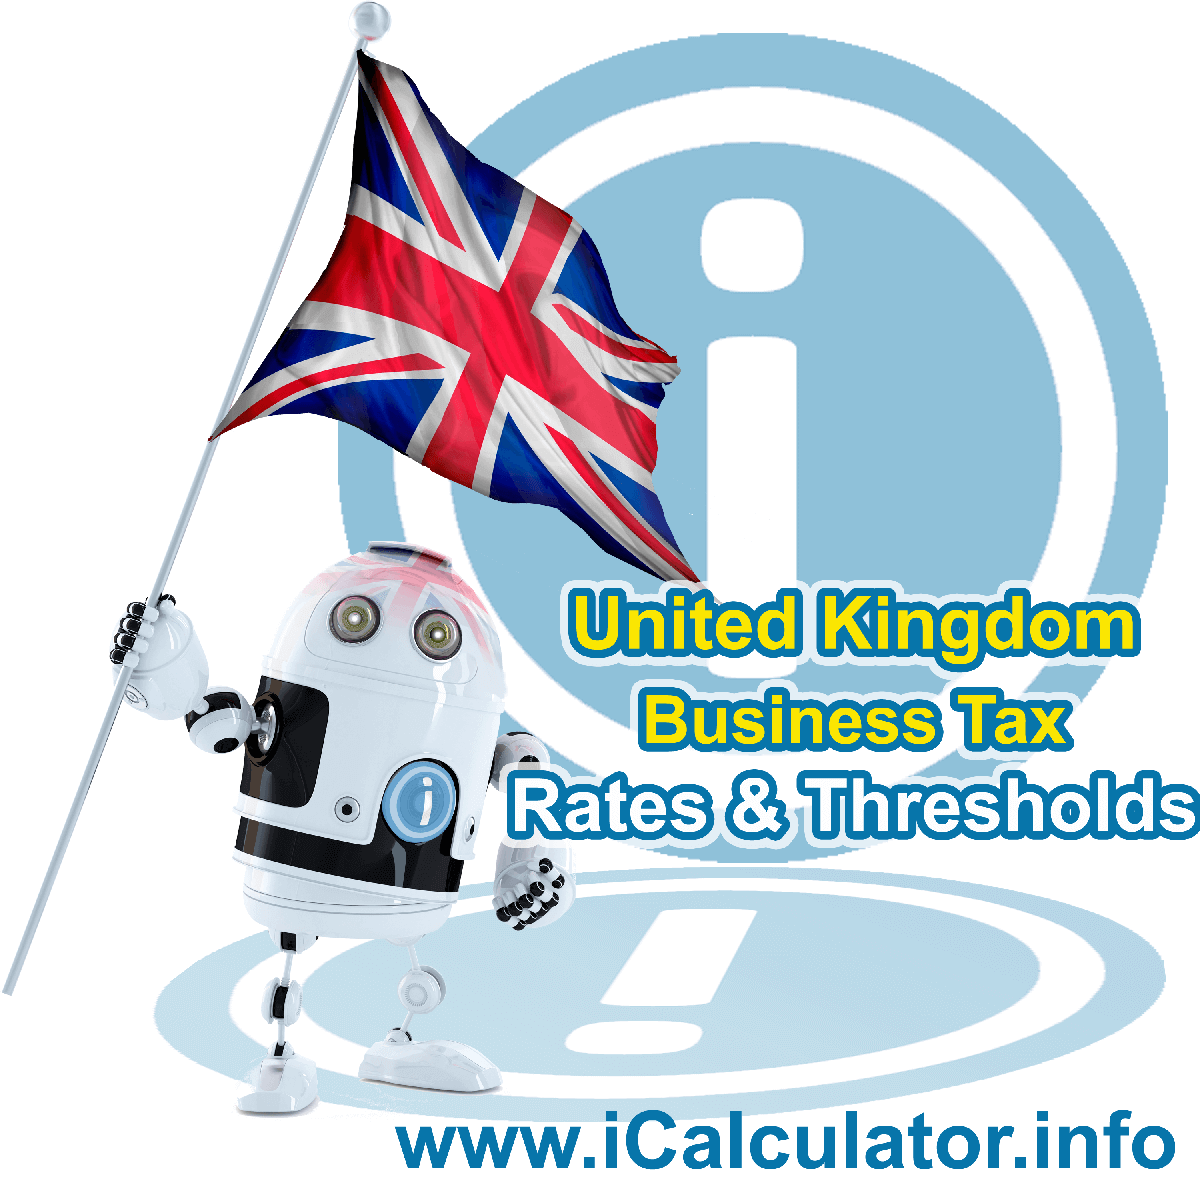 United Kingdom Corporation Tax Rates in 2011. This image shows the United Kingdom flag and information relating to the corporation tax formula for the United Kingdom Corporation Tax Calculator in 2011